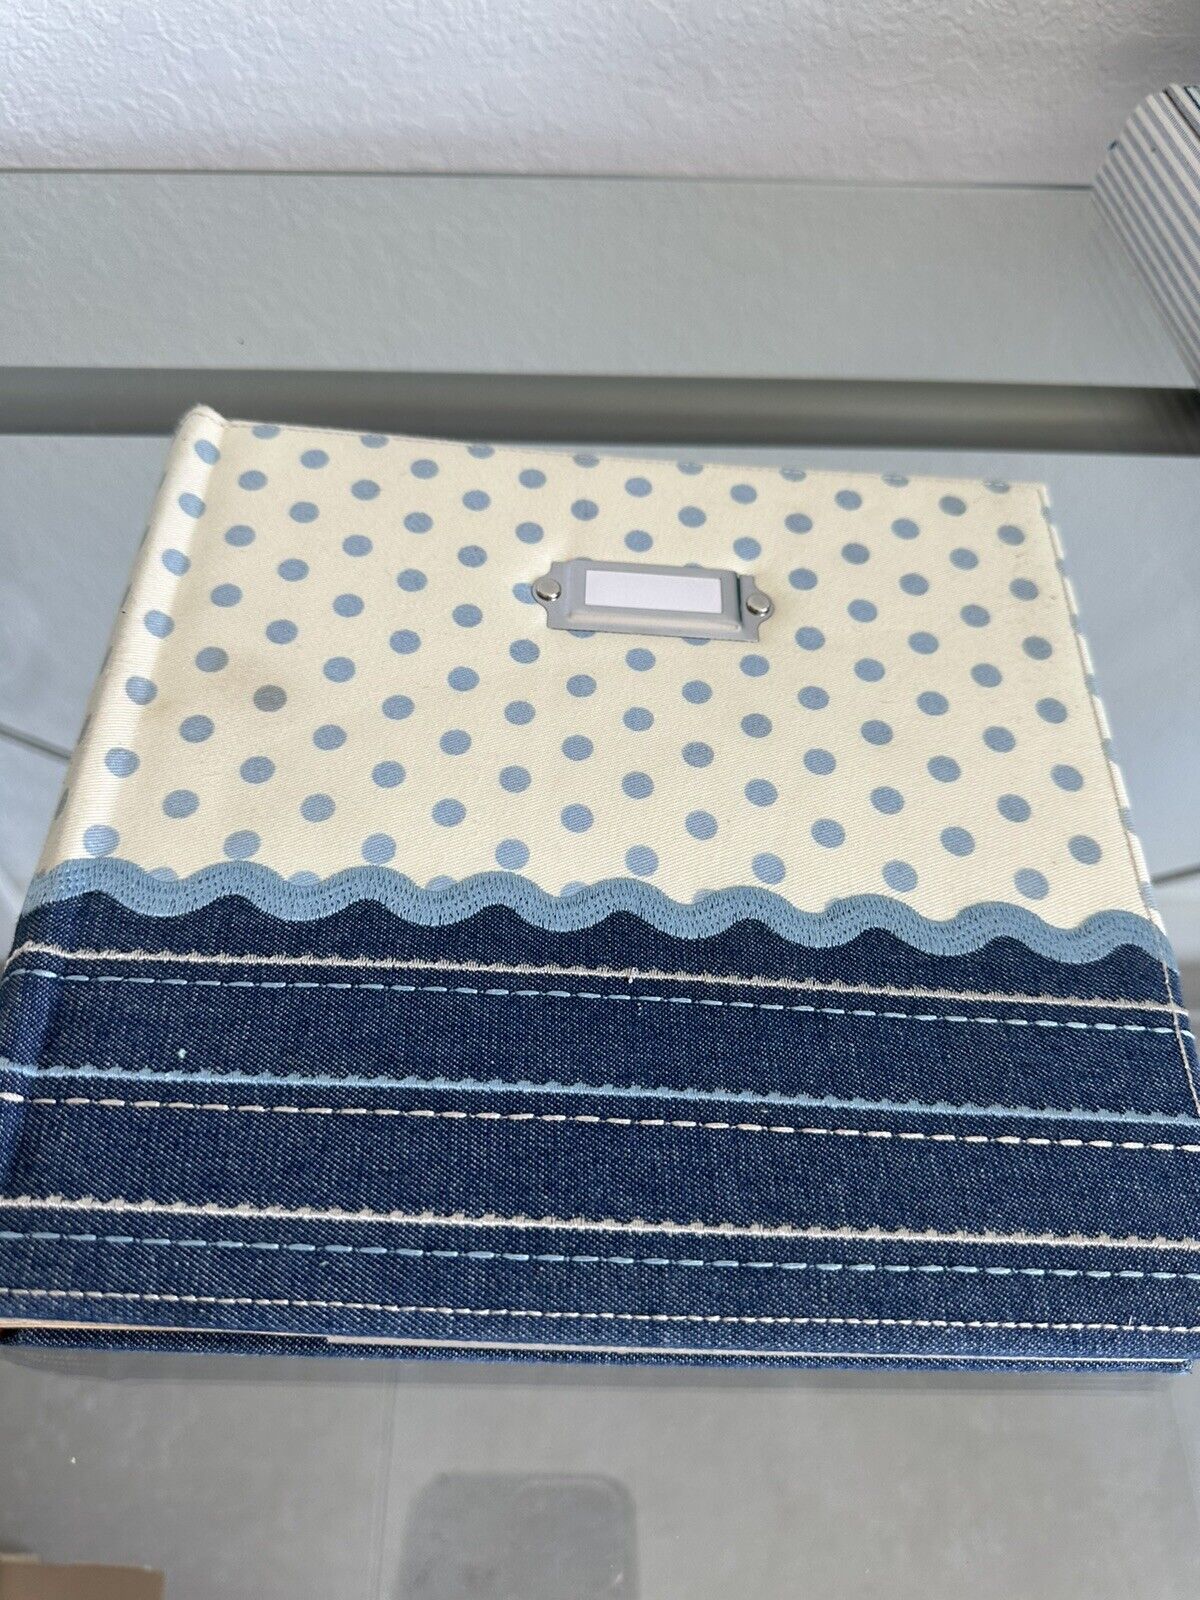 Vintage photo album 6x 4 . with fabric cover